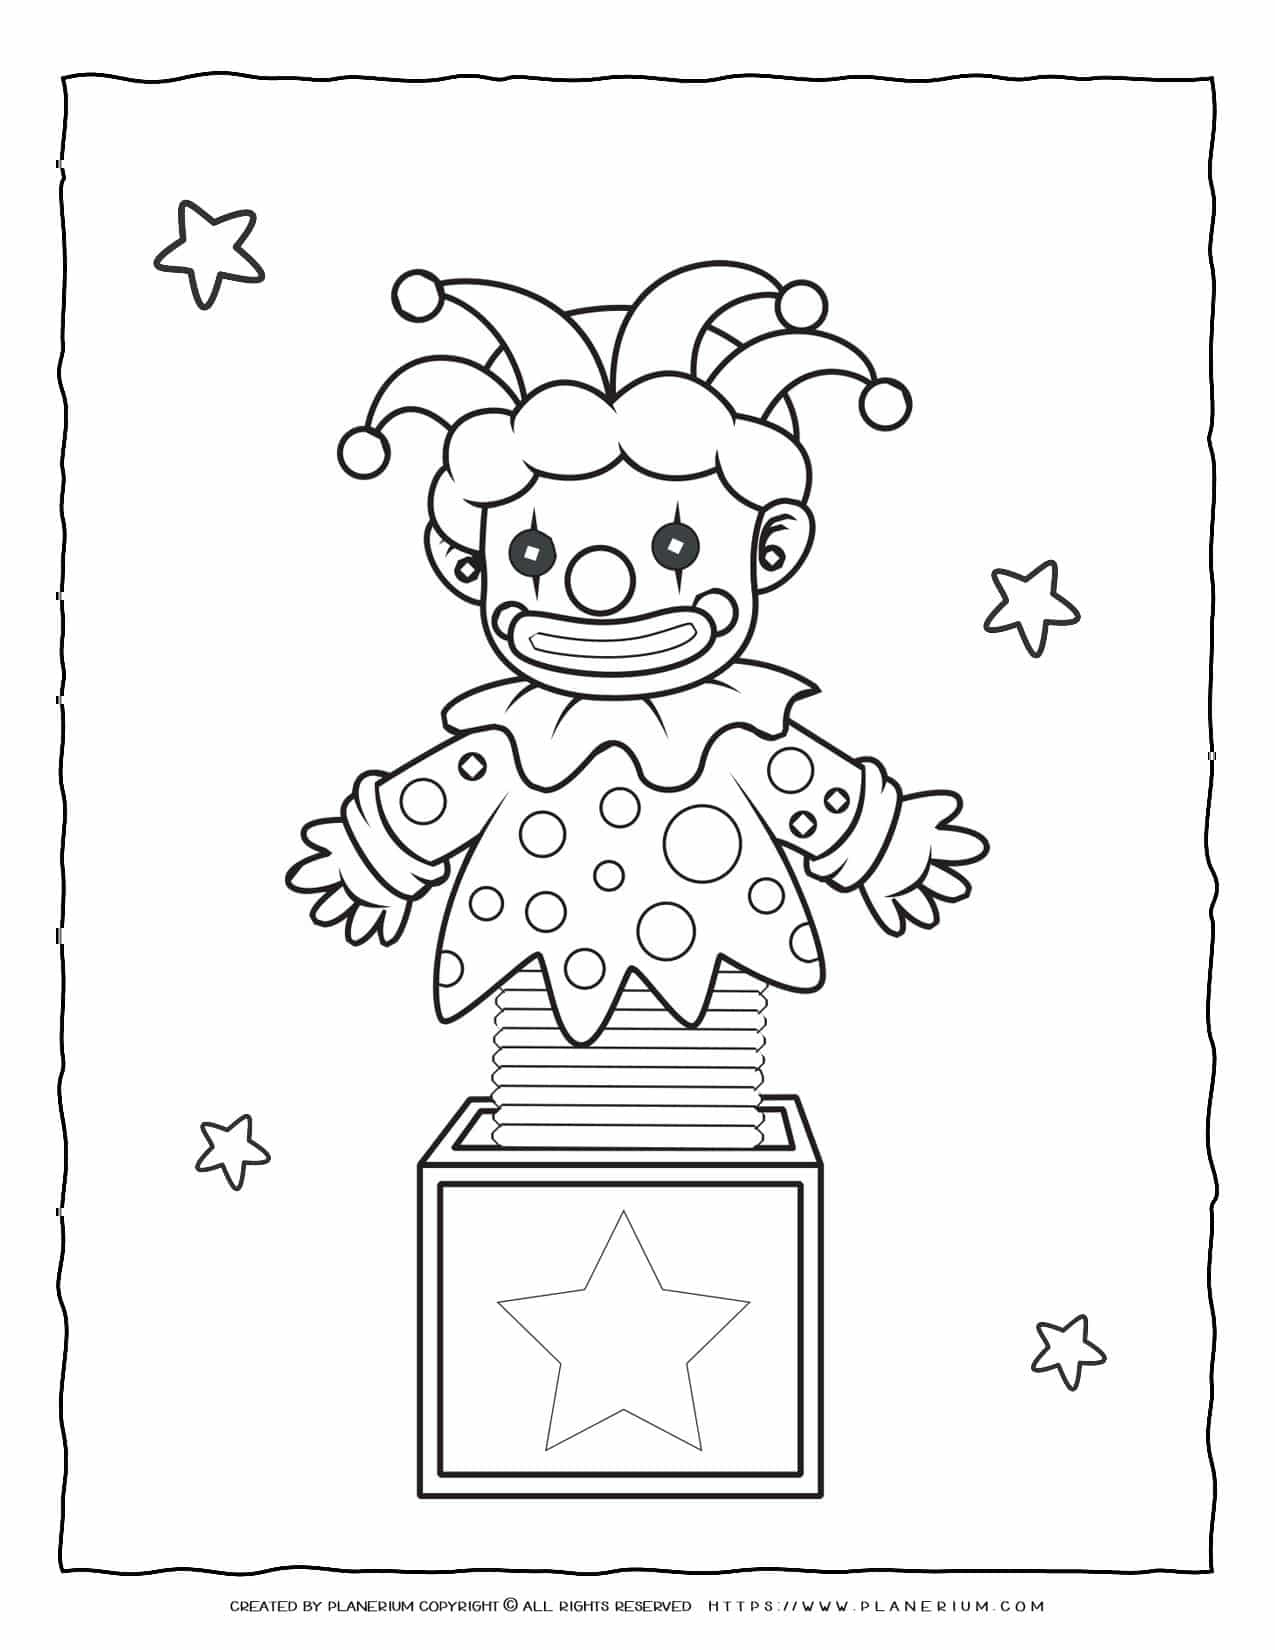 Circus Coloring Page - Jack in a Box | Planerium